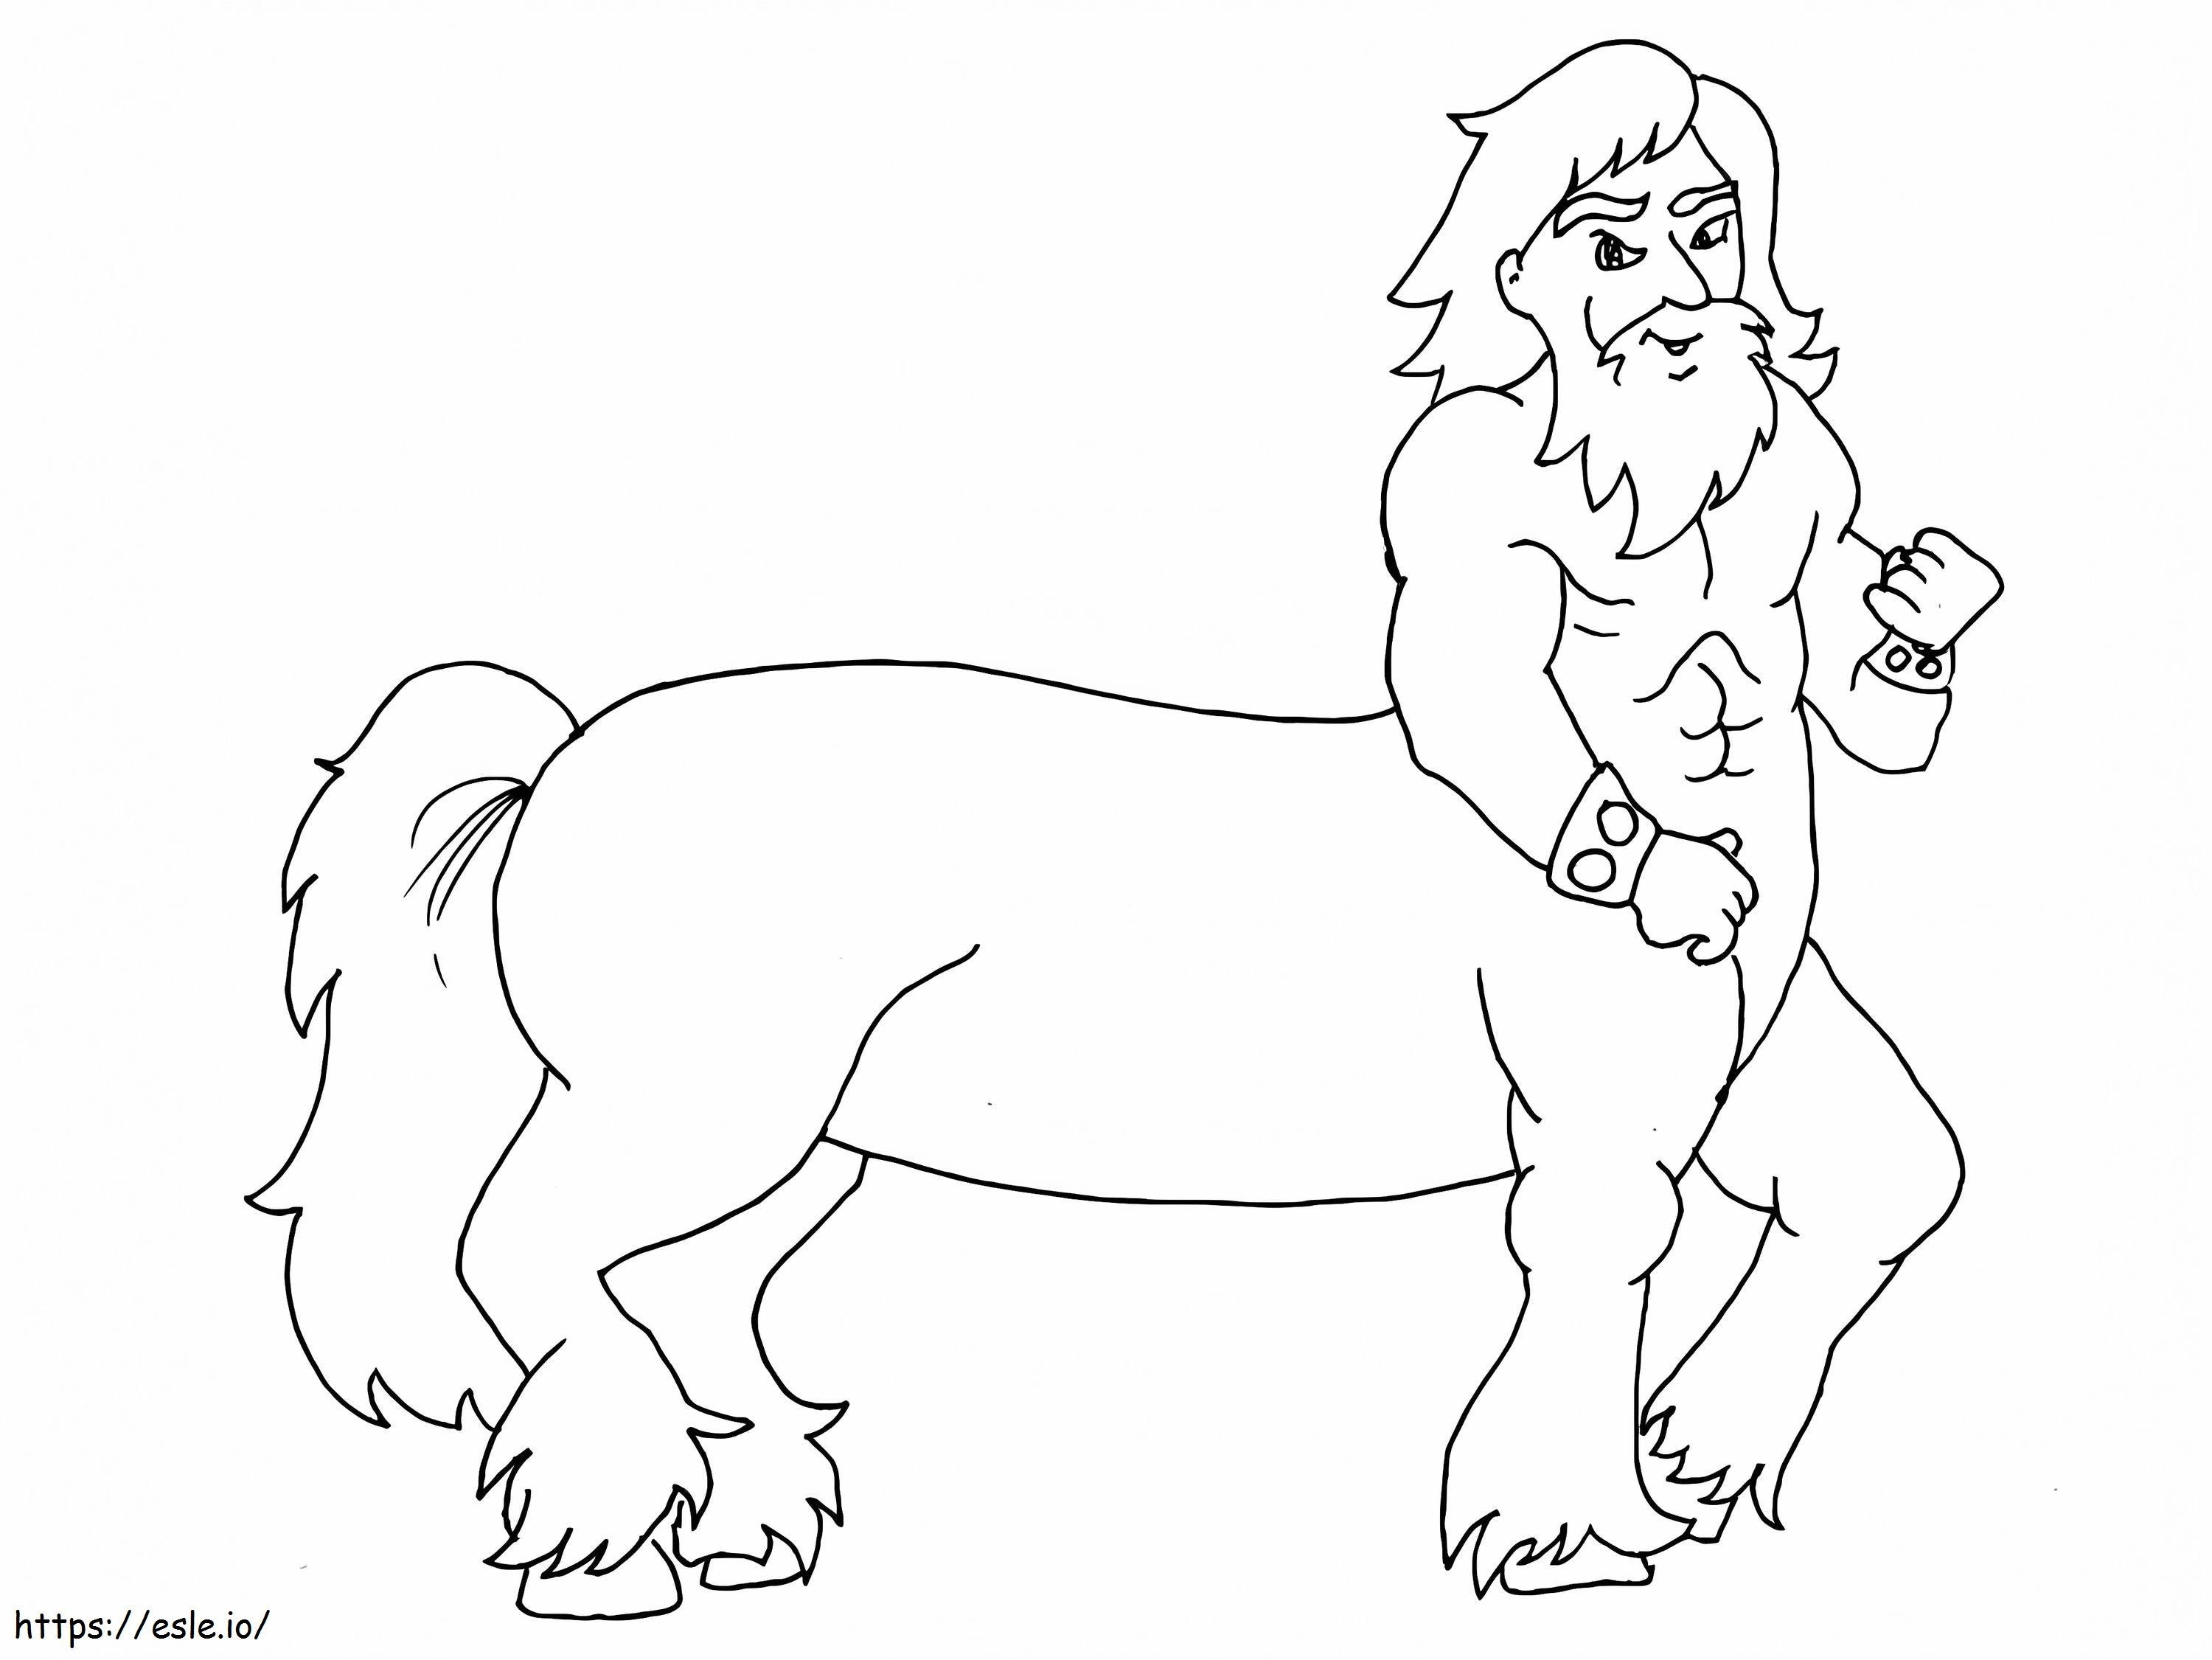 Animated Centaur coloring page